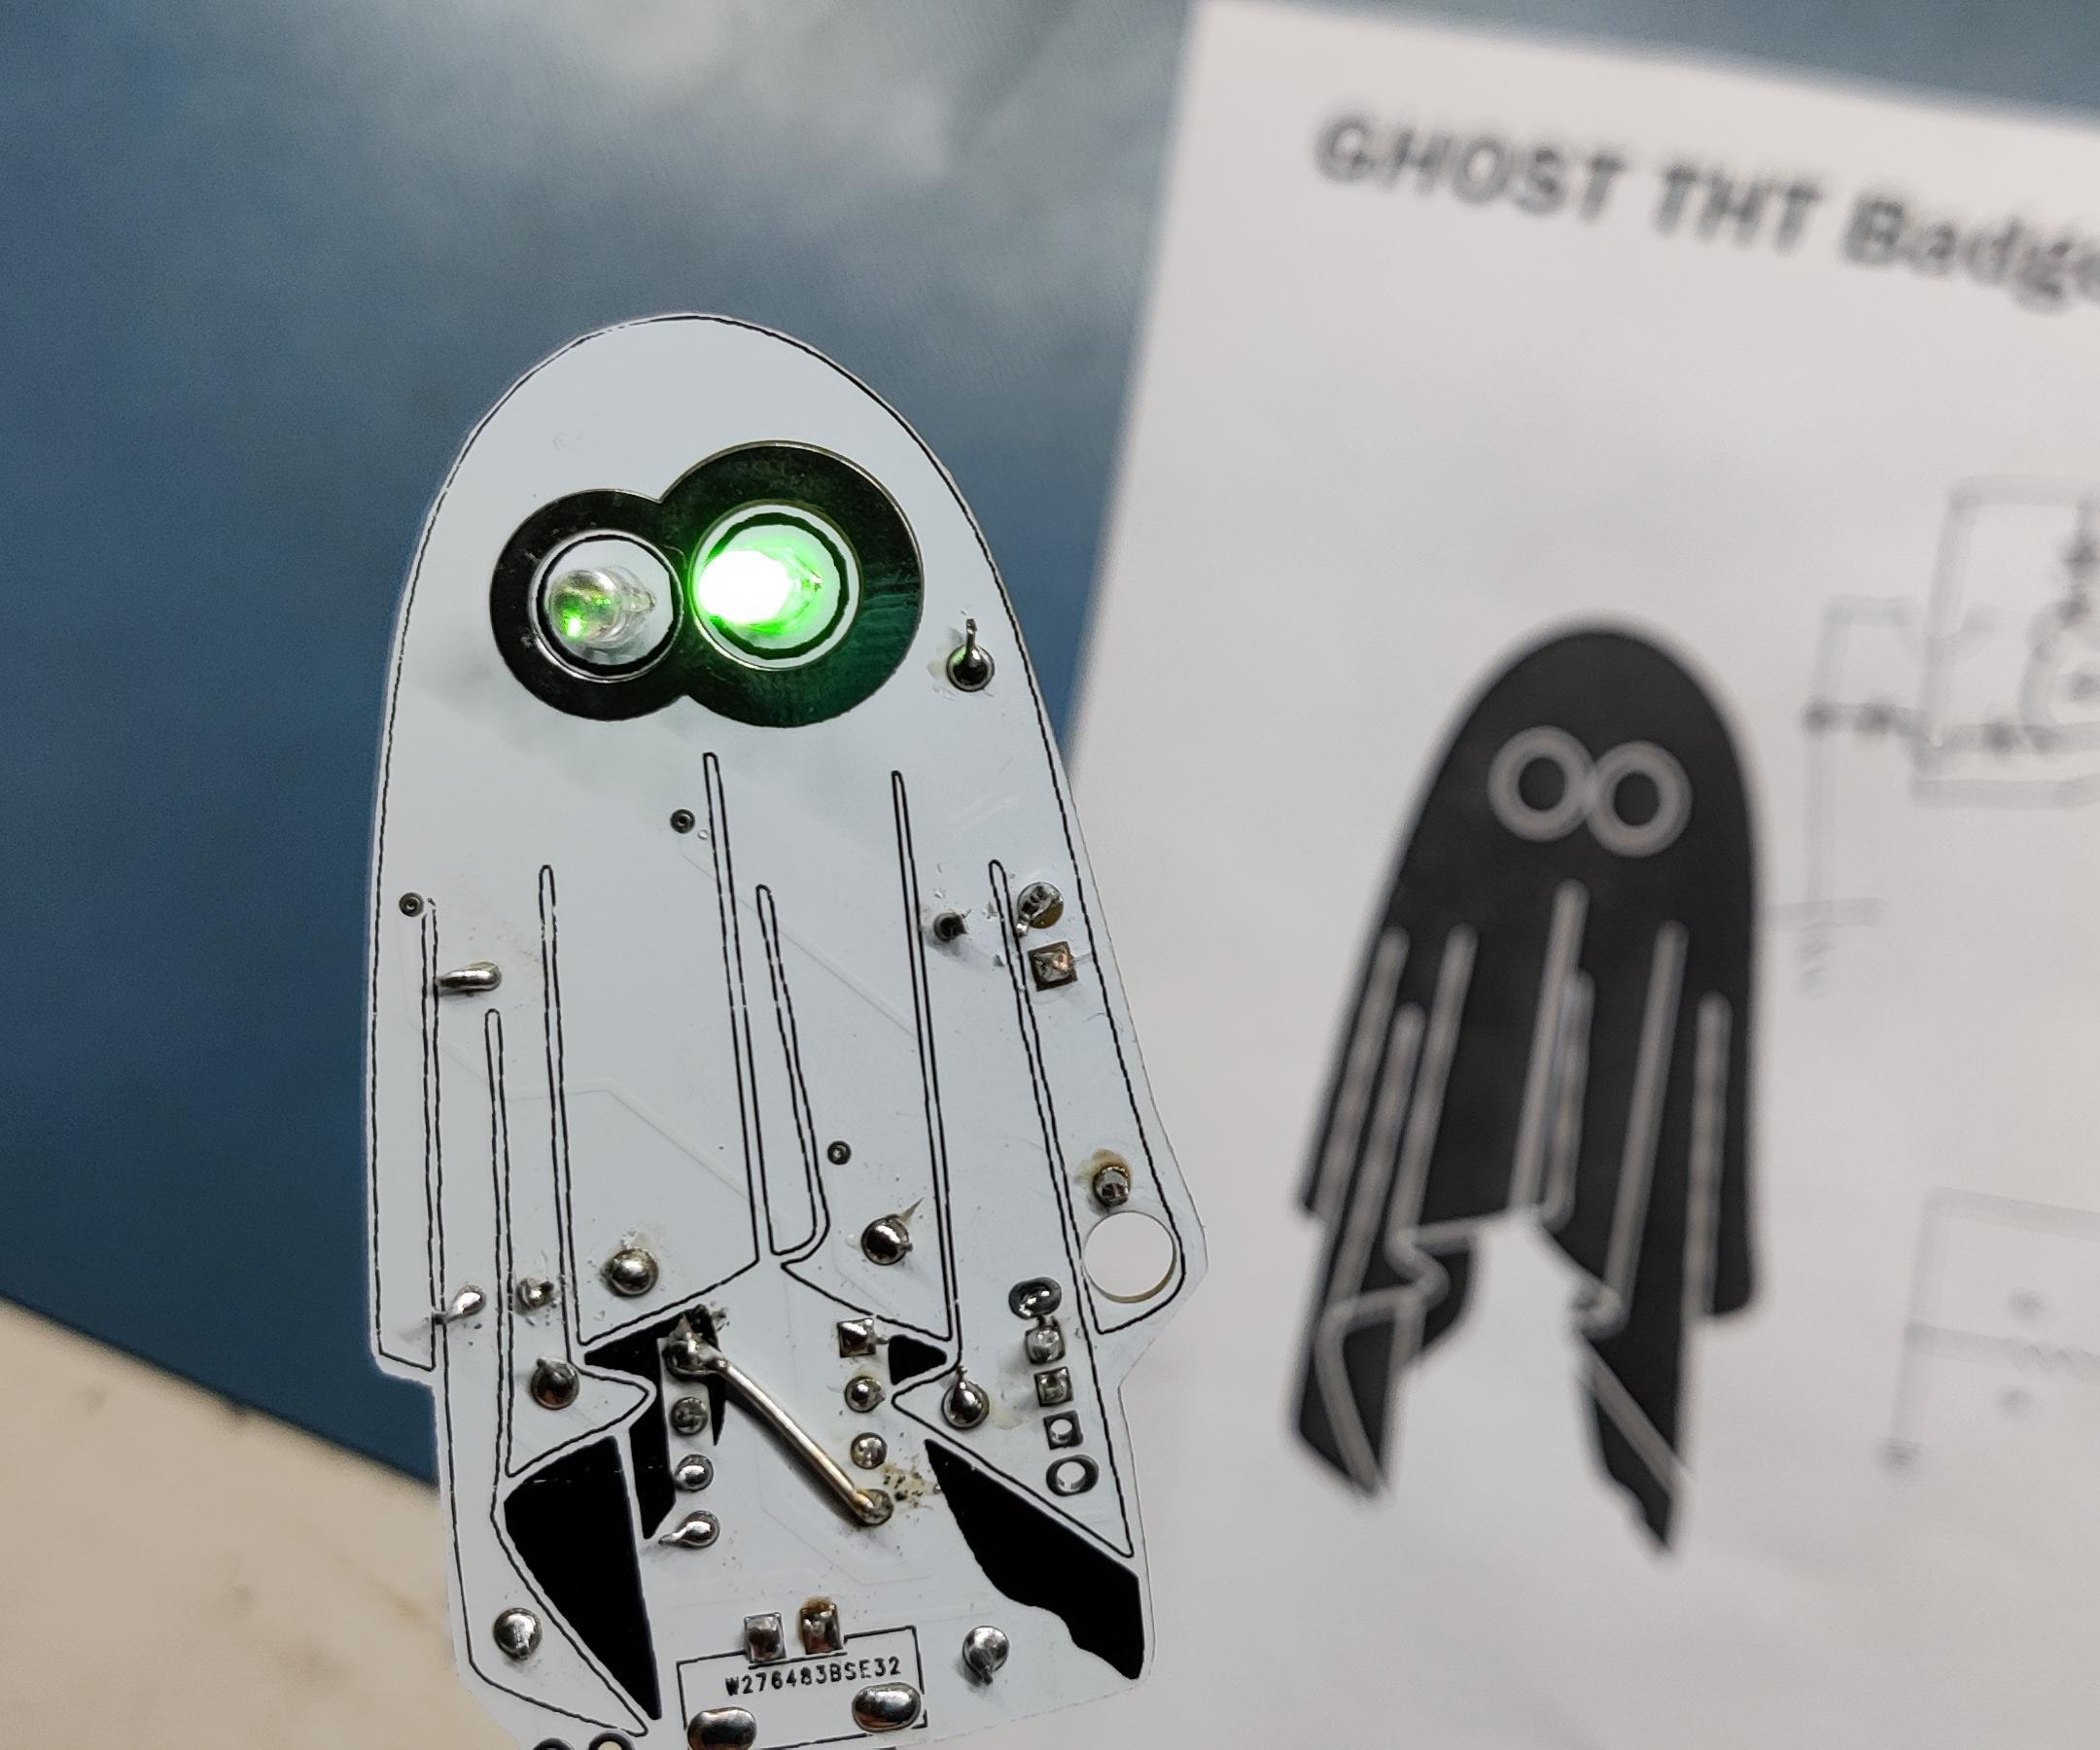 Yet Another Badge, a Ghost Badge Made From 555 Timer IC